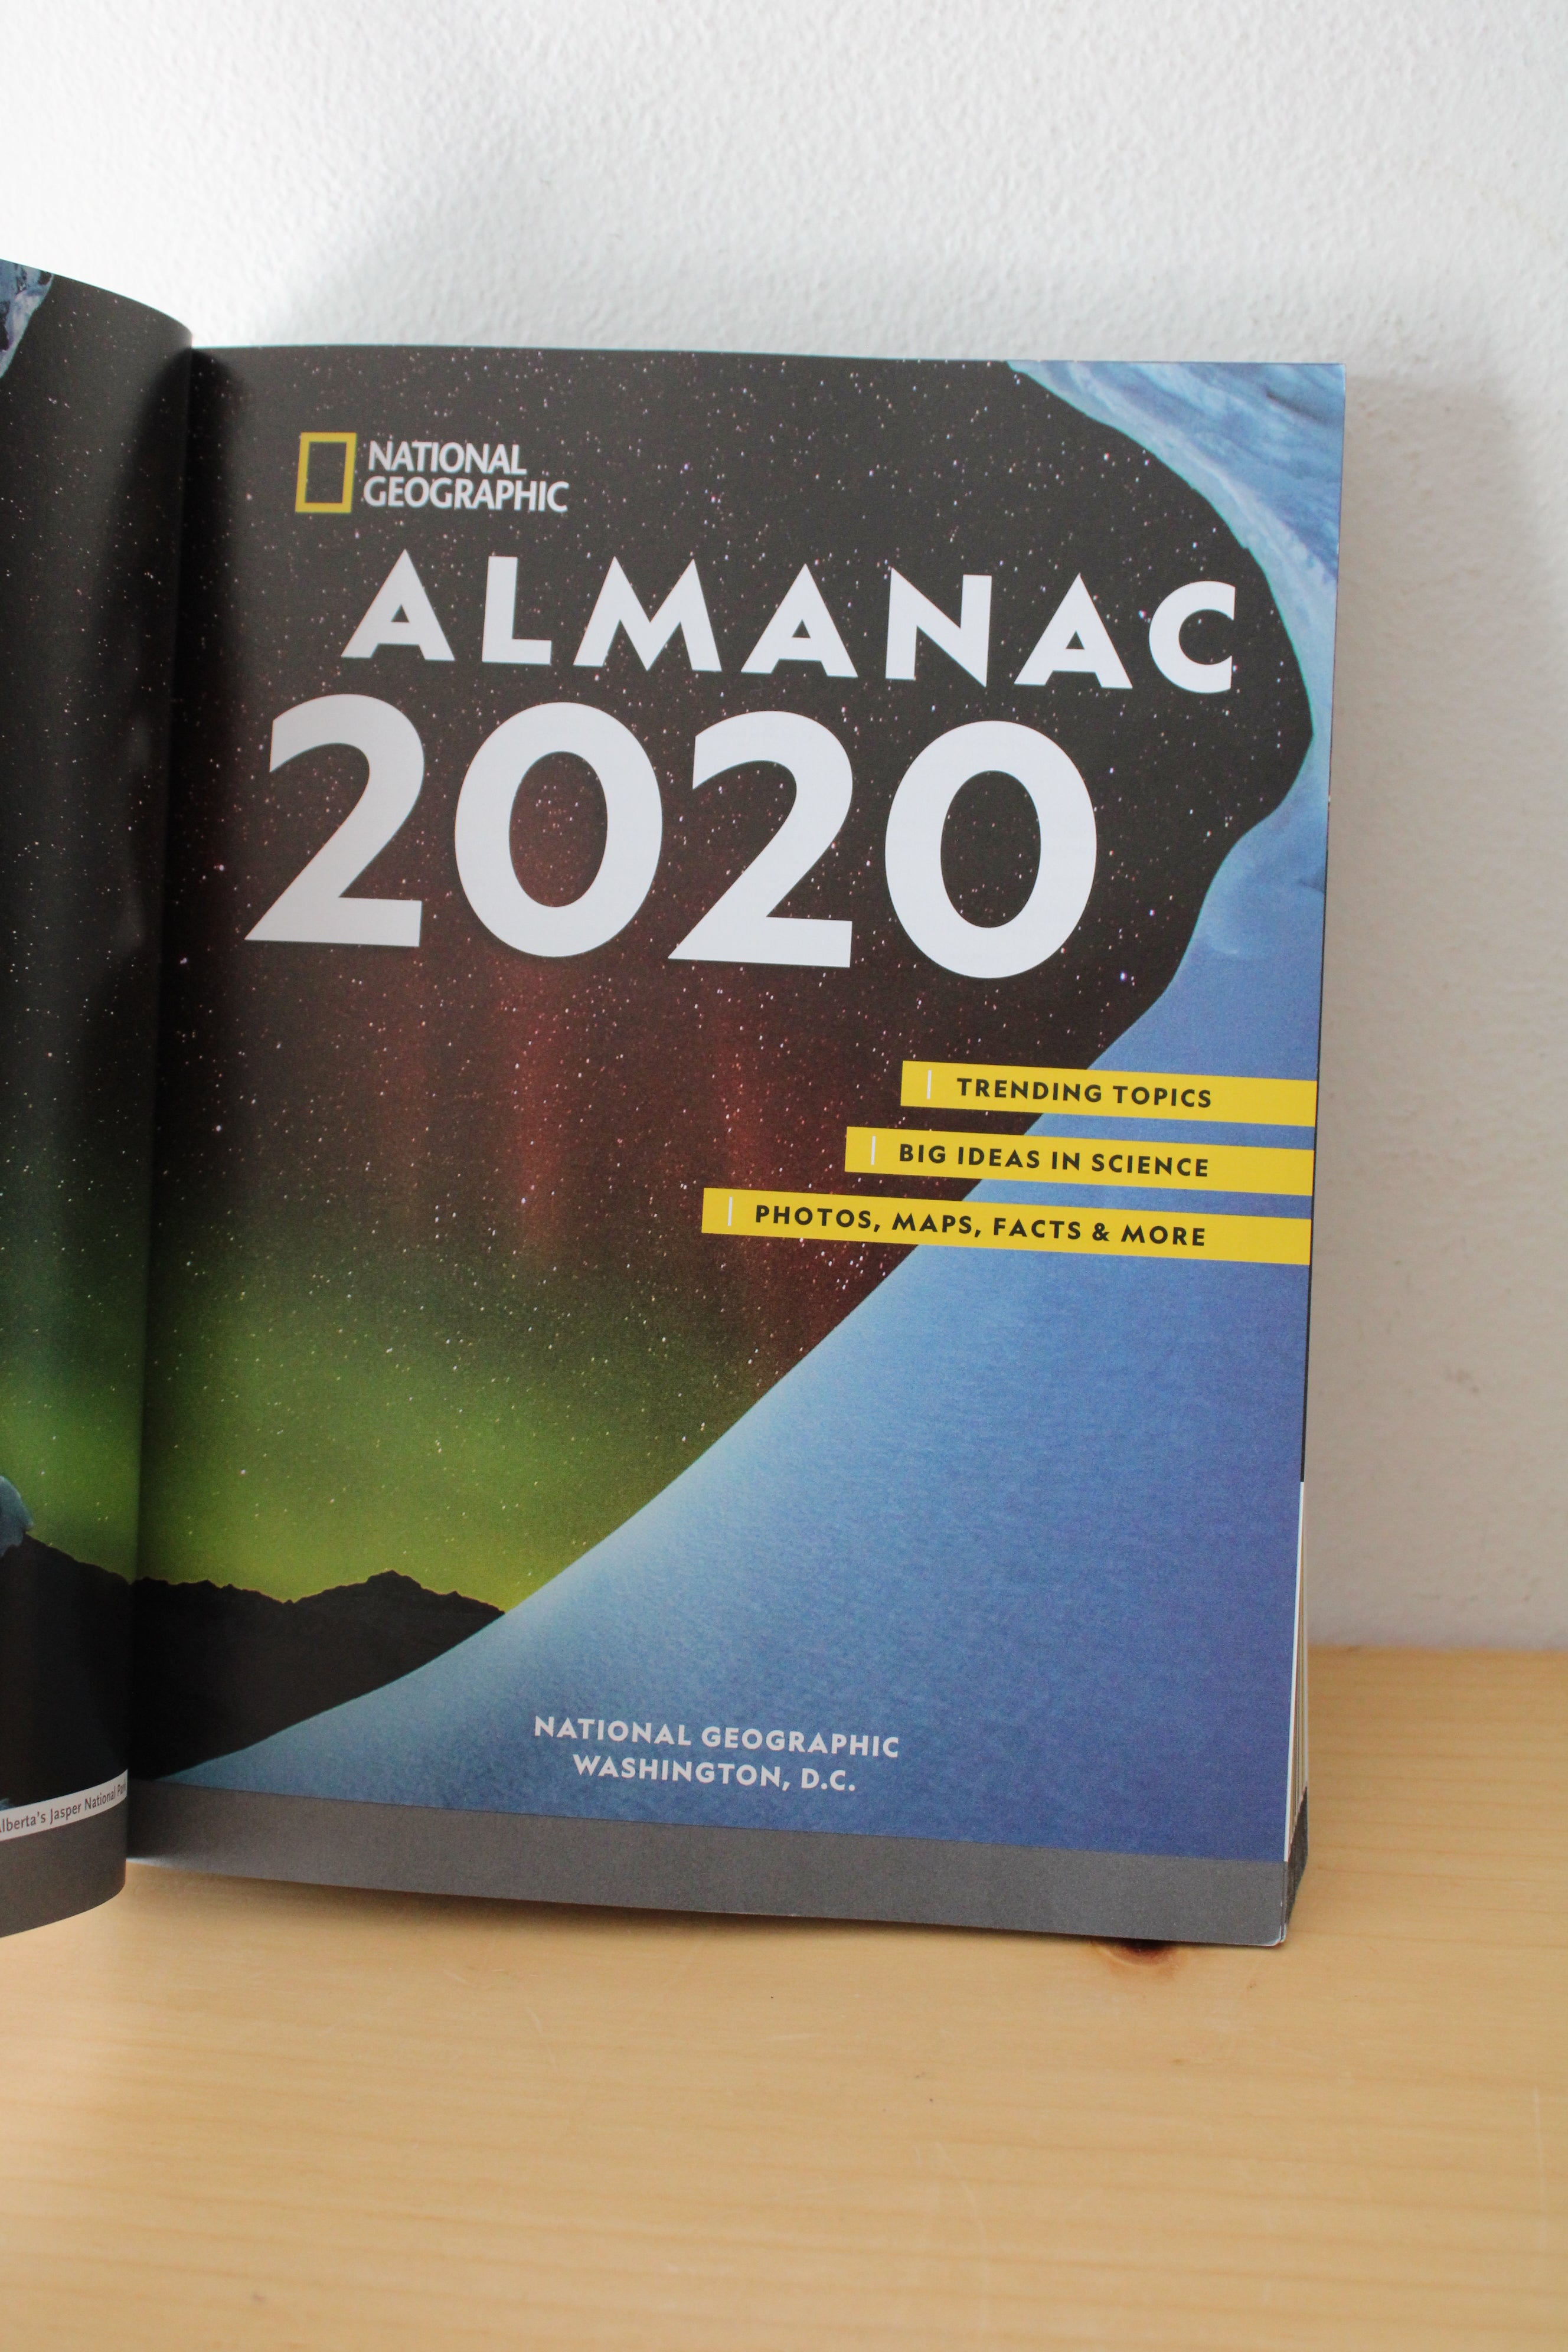 National Geographic Almanac 2020: Trending Topics, Big Ideas In Science, Photos, Maps, Facts , & More